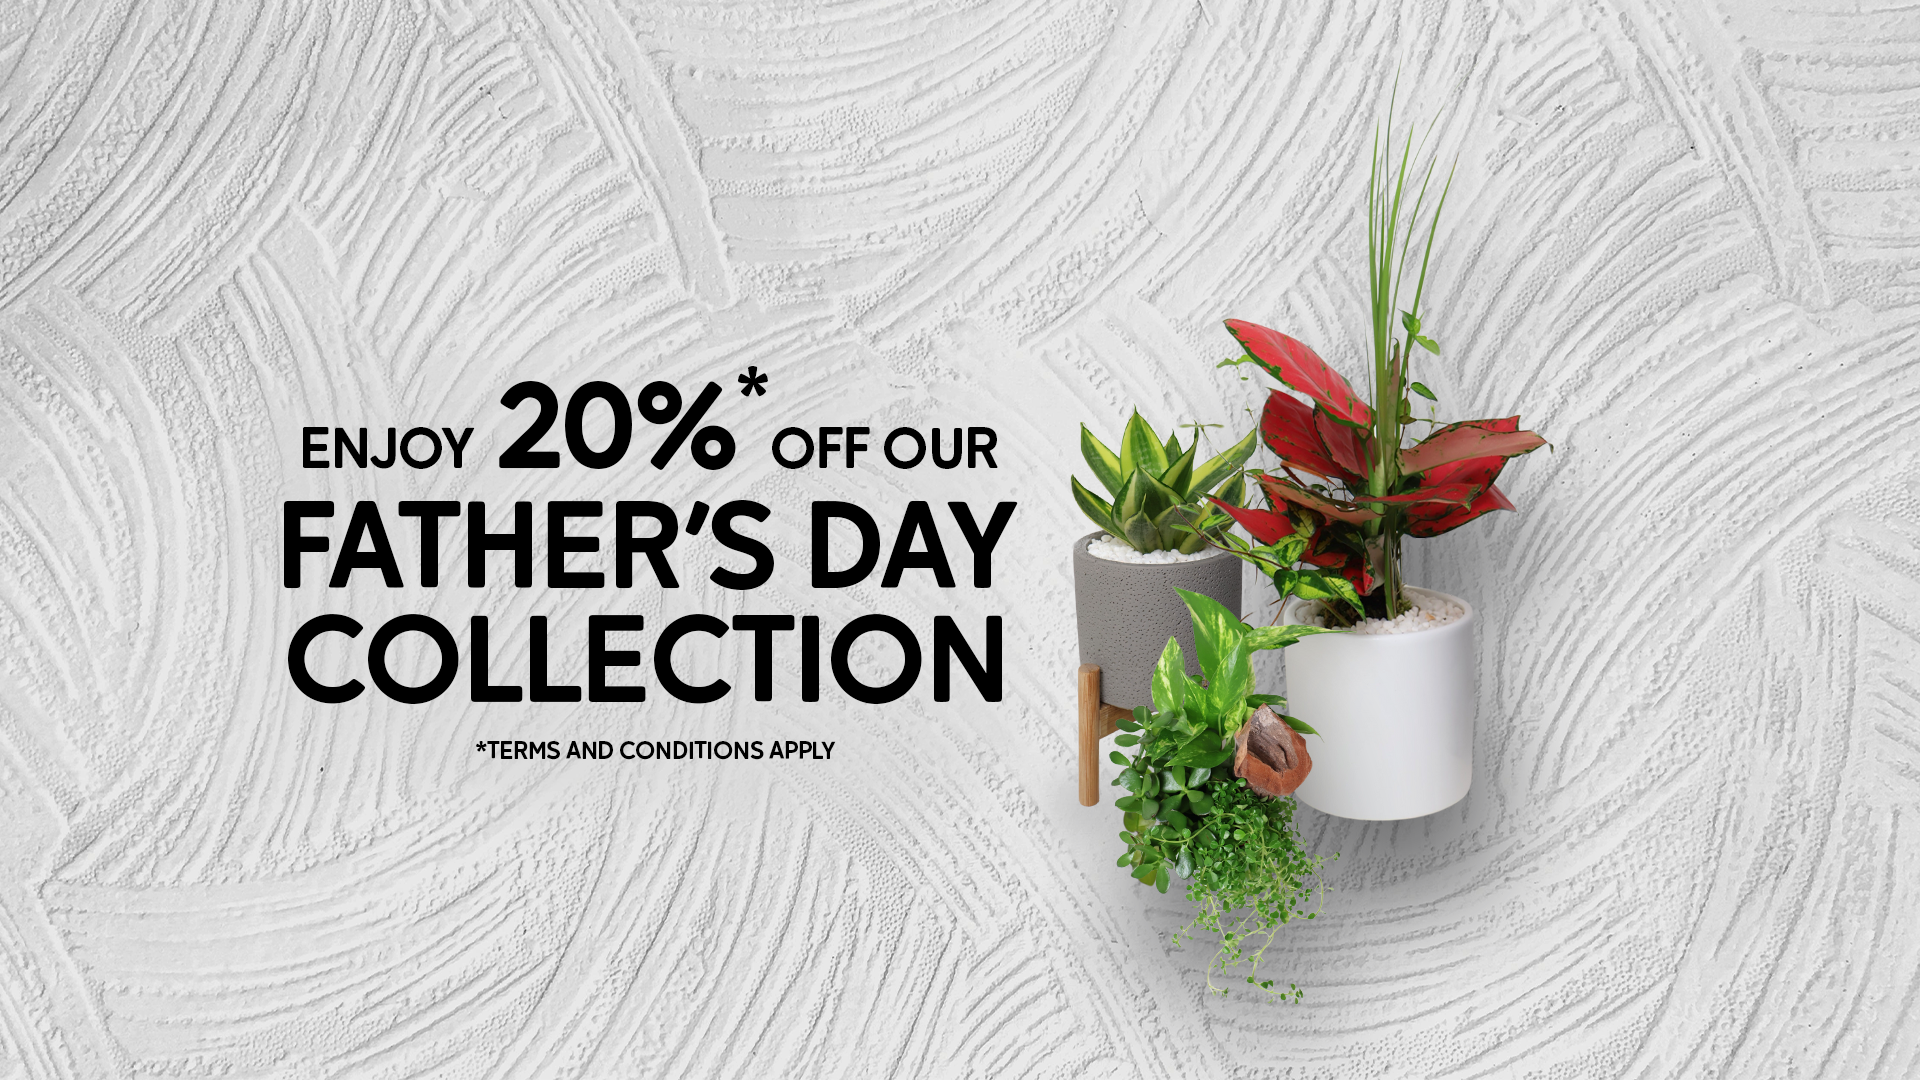 20% off Father's Day collection in Gardens by the Bay's eShop